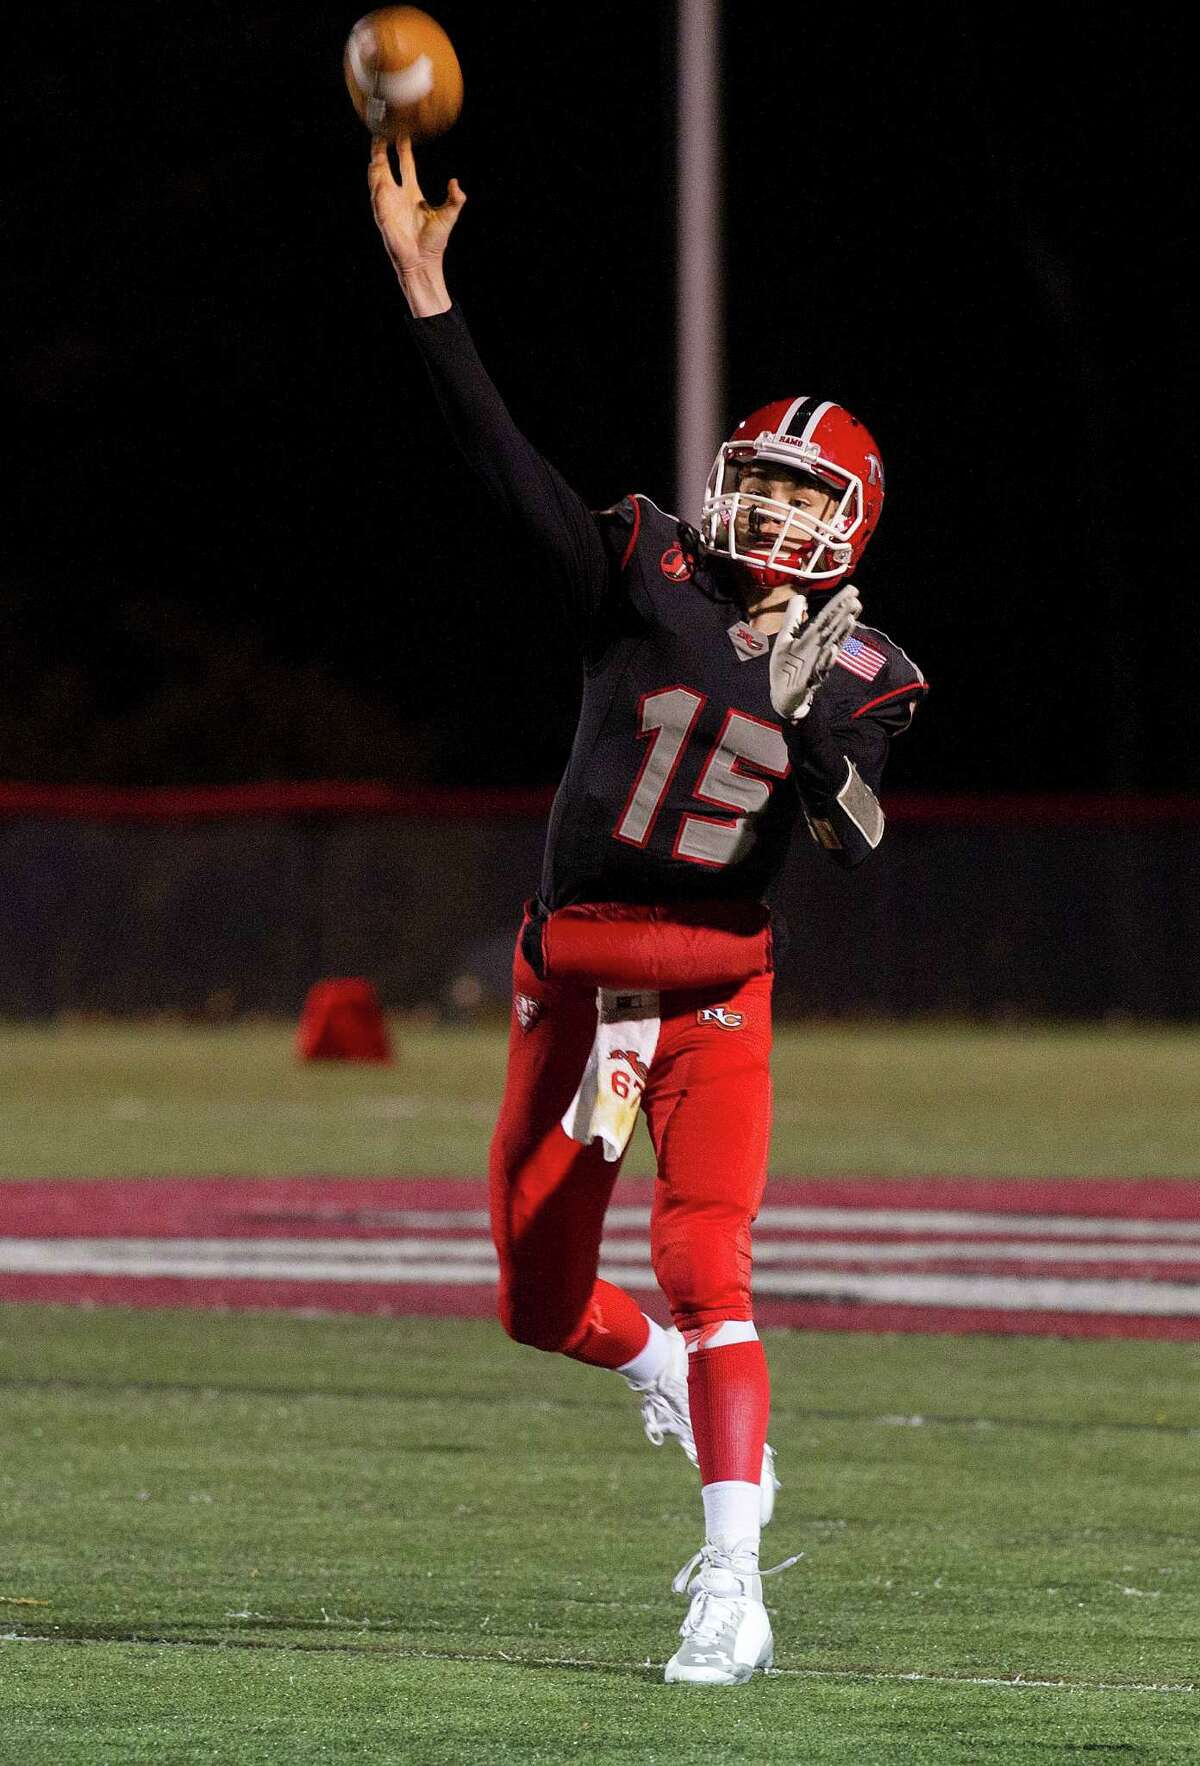 New Canaan's Michael Collins throws a pass during Friday's football game against Wilton at New Canaan High School on November 7, 2014.